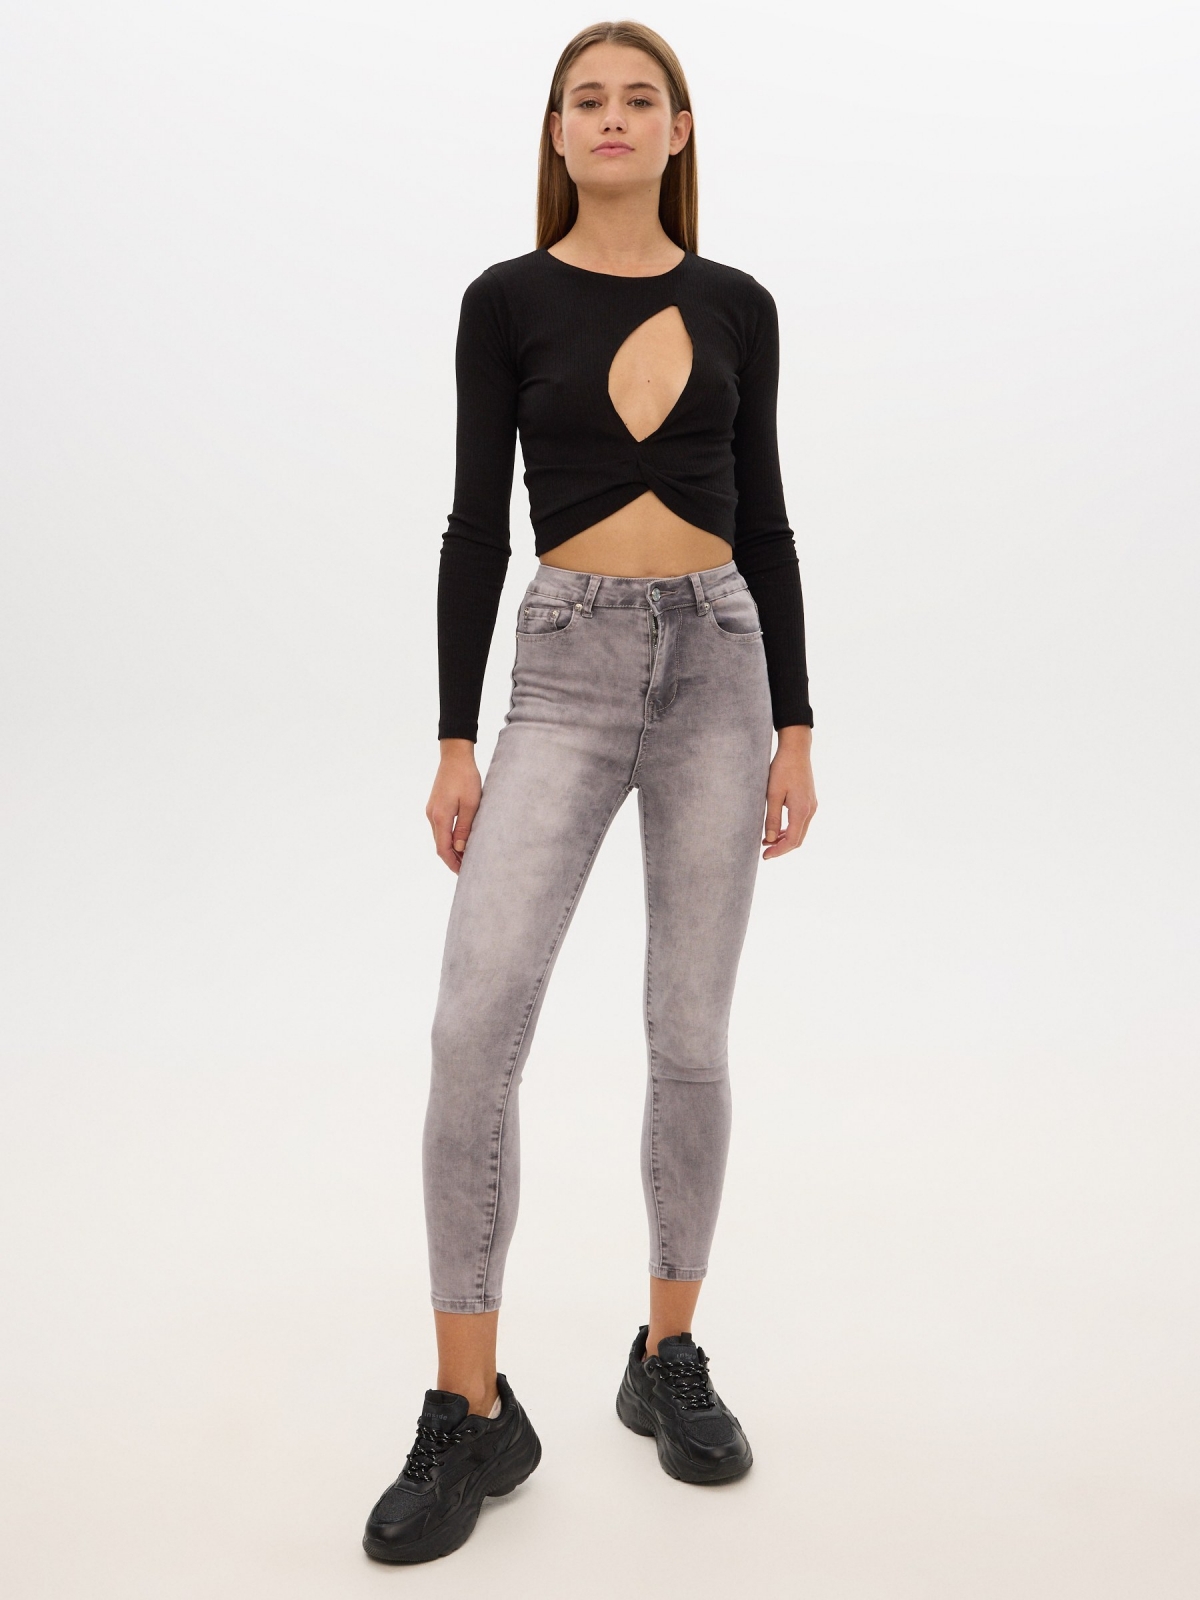 Jeans skinny high rise cinza claro vista geral frontal